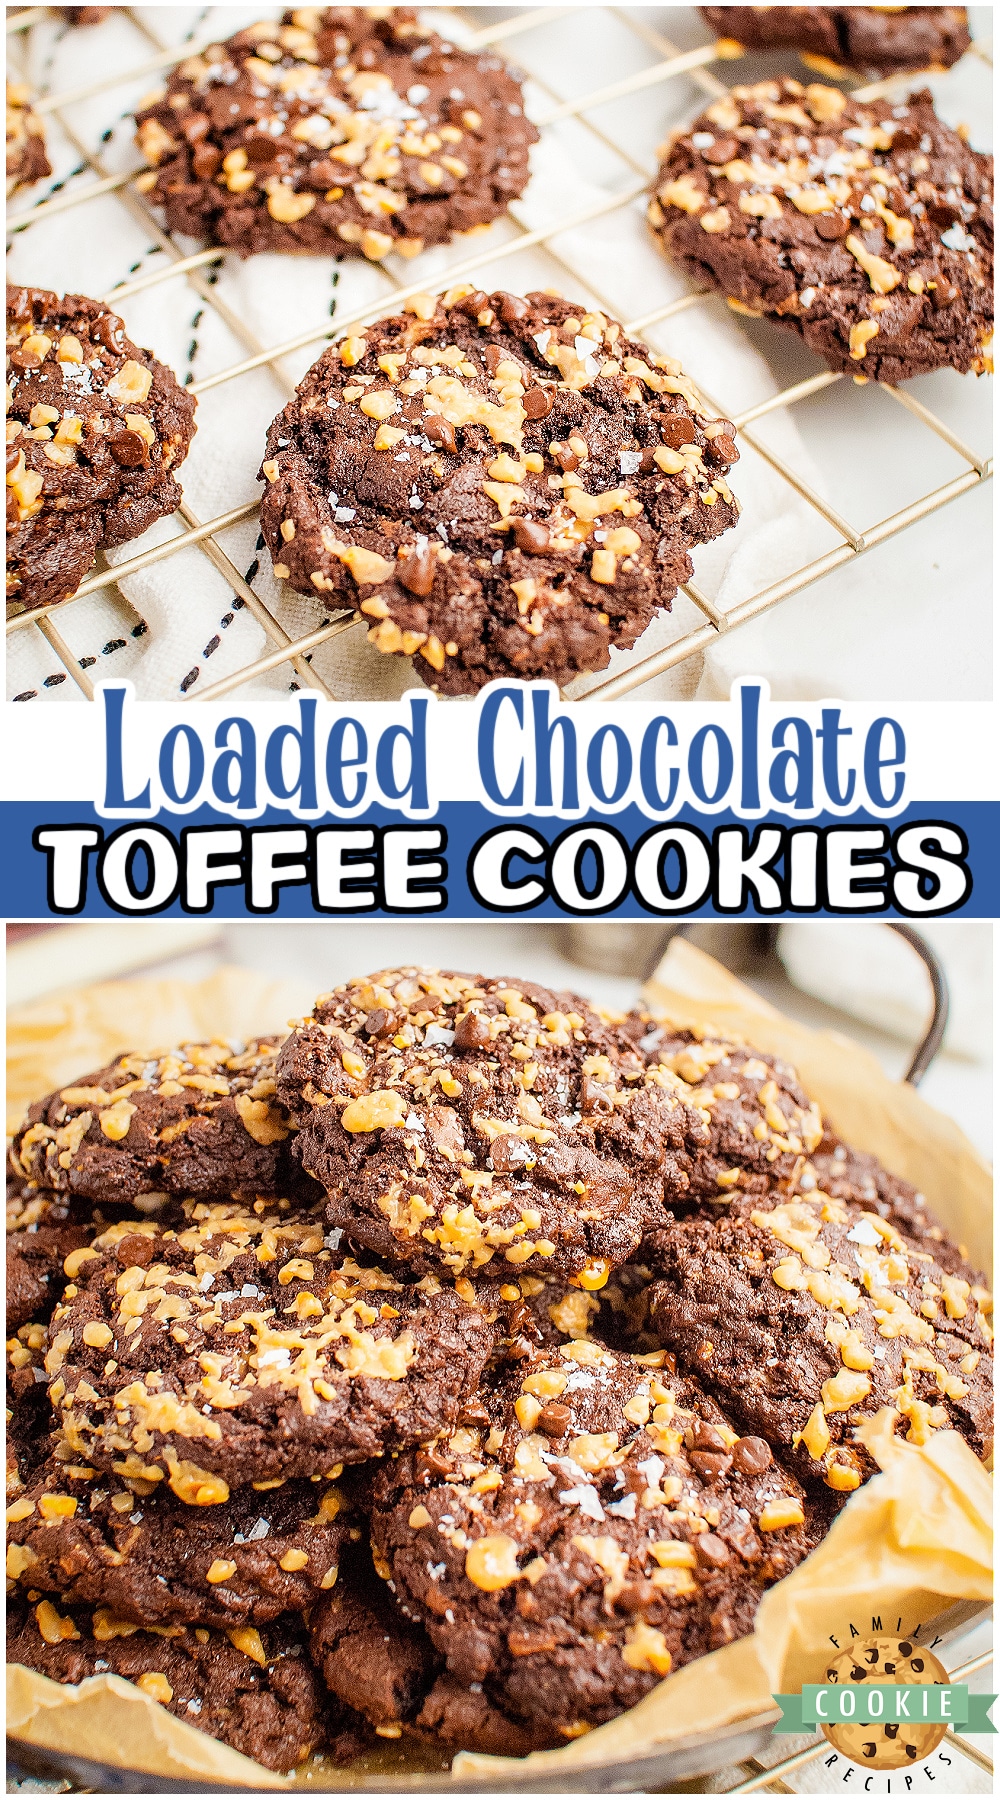 Loaded Chocolate Toffee Cookies made with double the chocolate and toffee! Great chocolate flavor & buttery toffee crunch in this simple toffee cookie recipe!